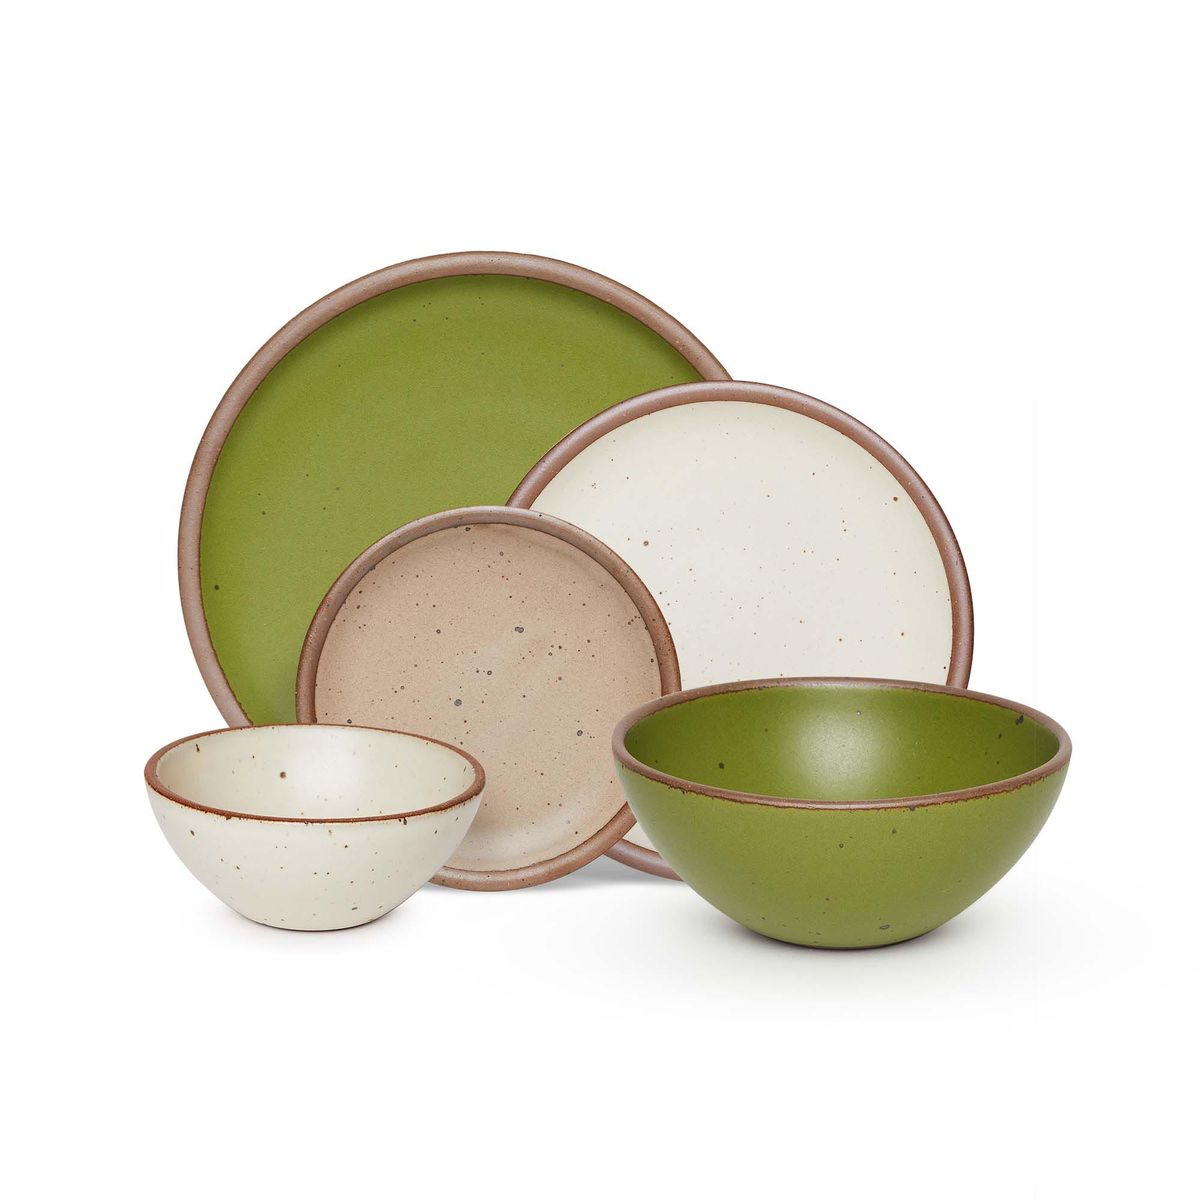 Potters Dinner Set - Five Piece in Bracken, a combination of Morel, Fiddlehead and Panna Cotta